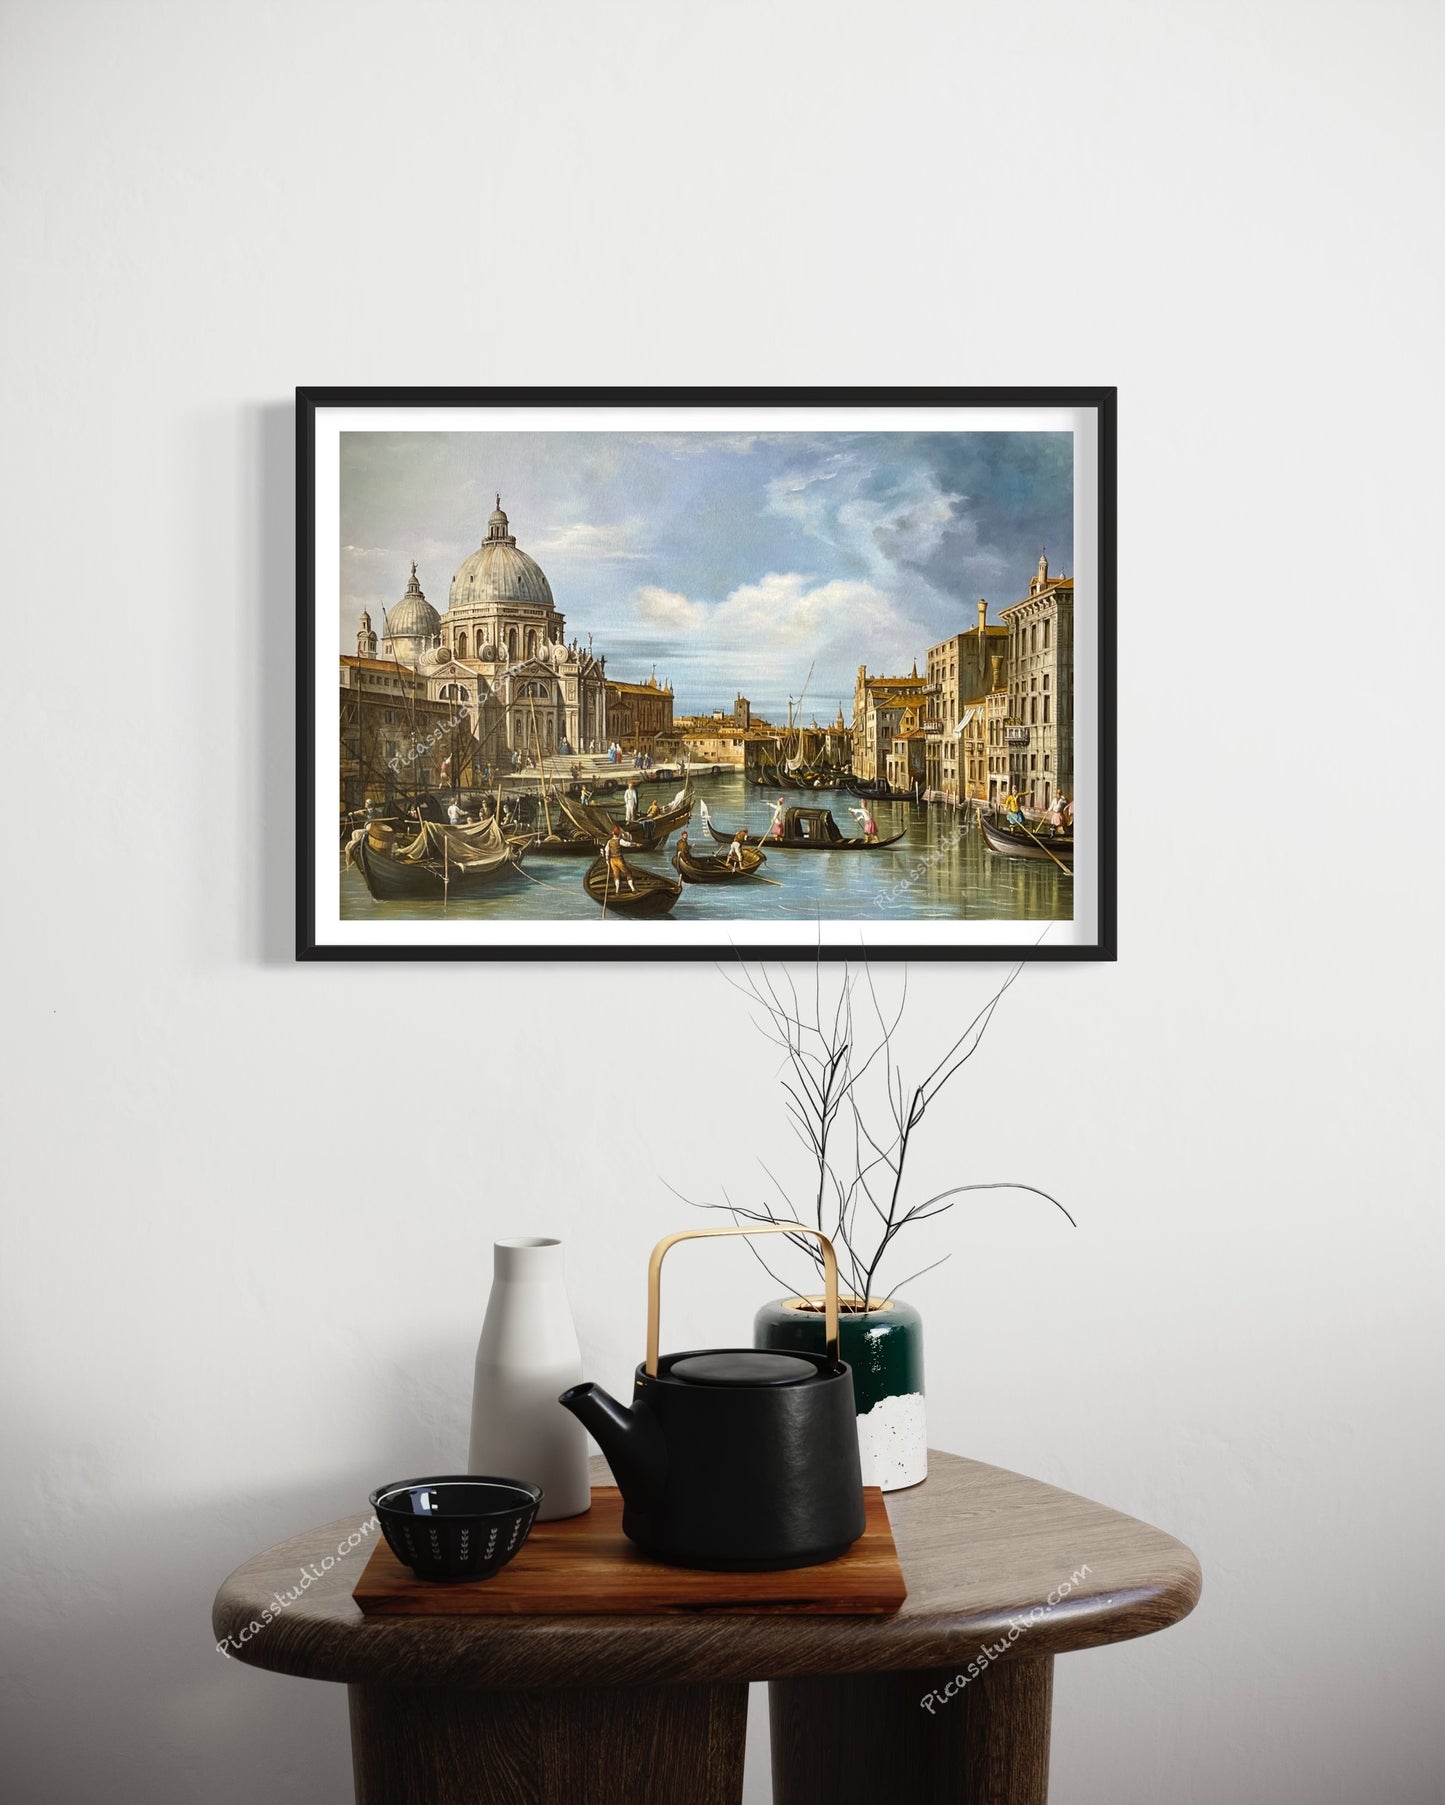 The Entrance to the Grand Canal, Venice Oil Painting Hand Painted Art on Canvas Vintage Wall Decor Unframed